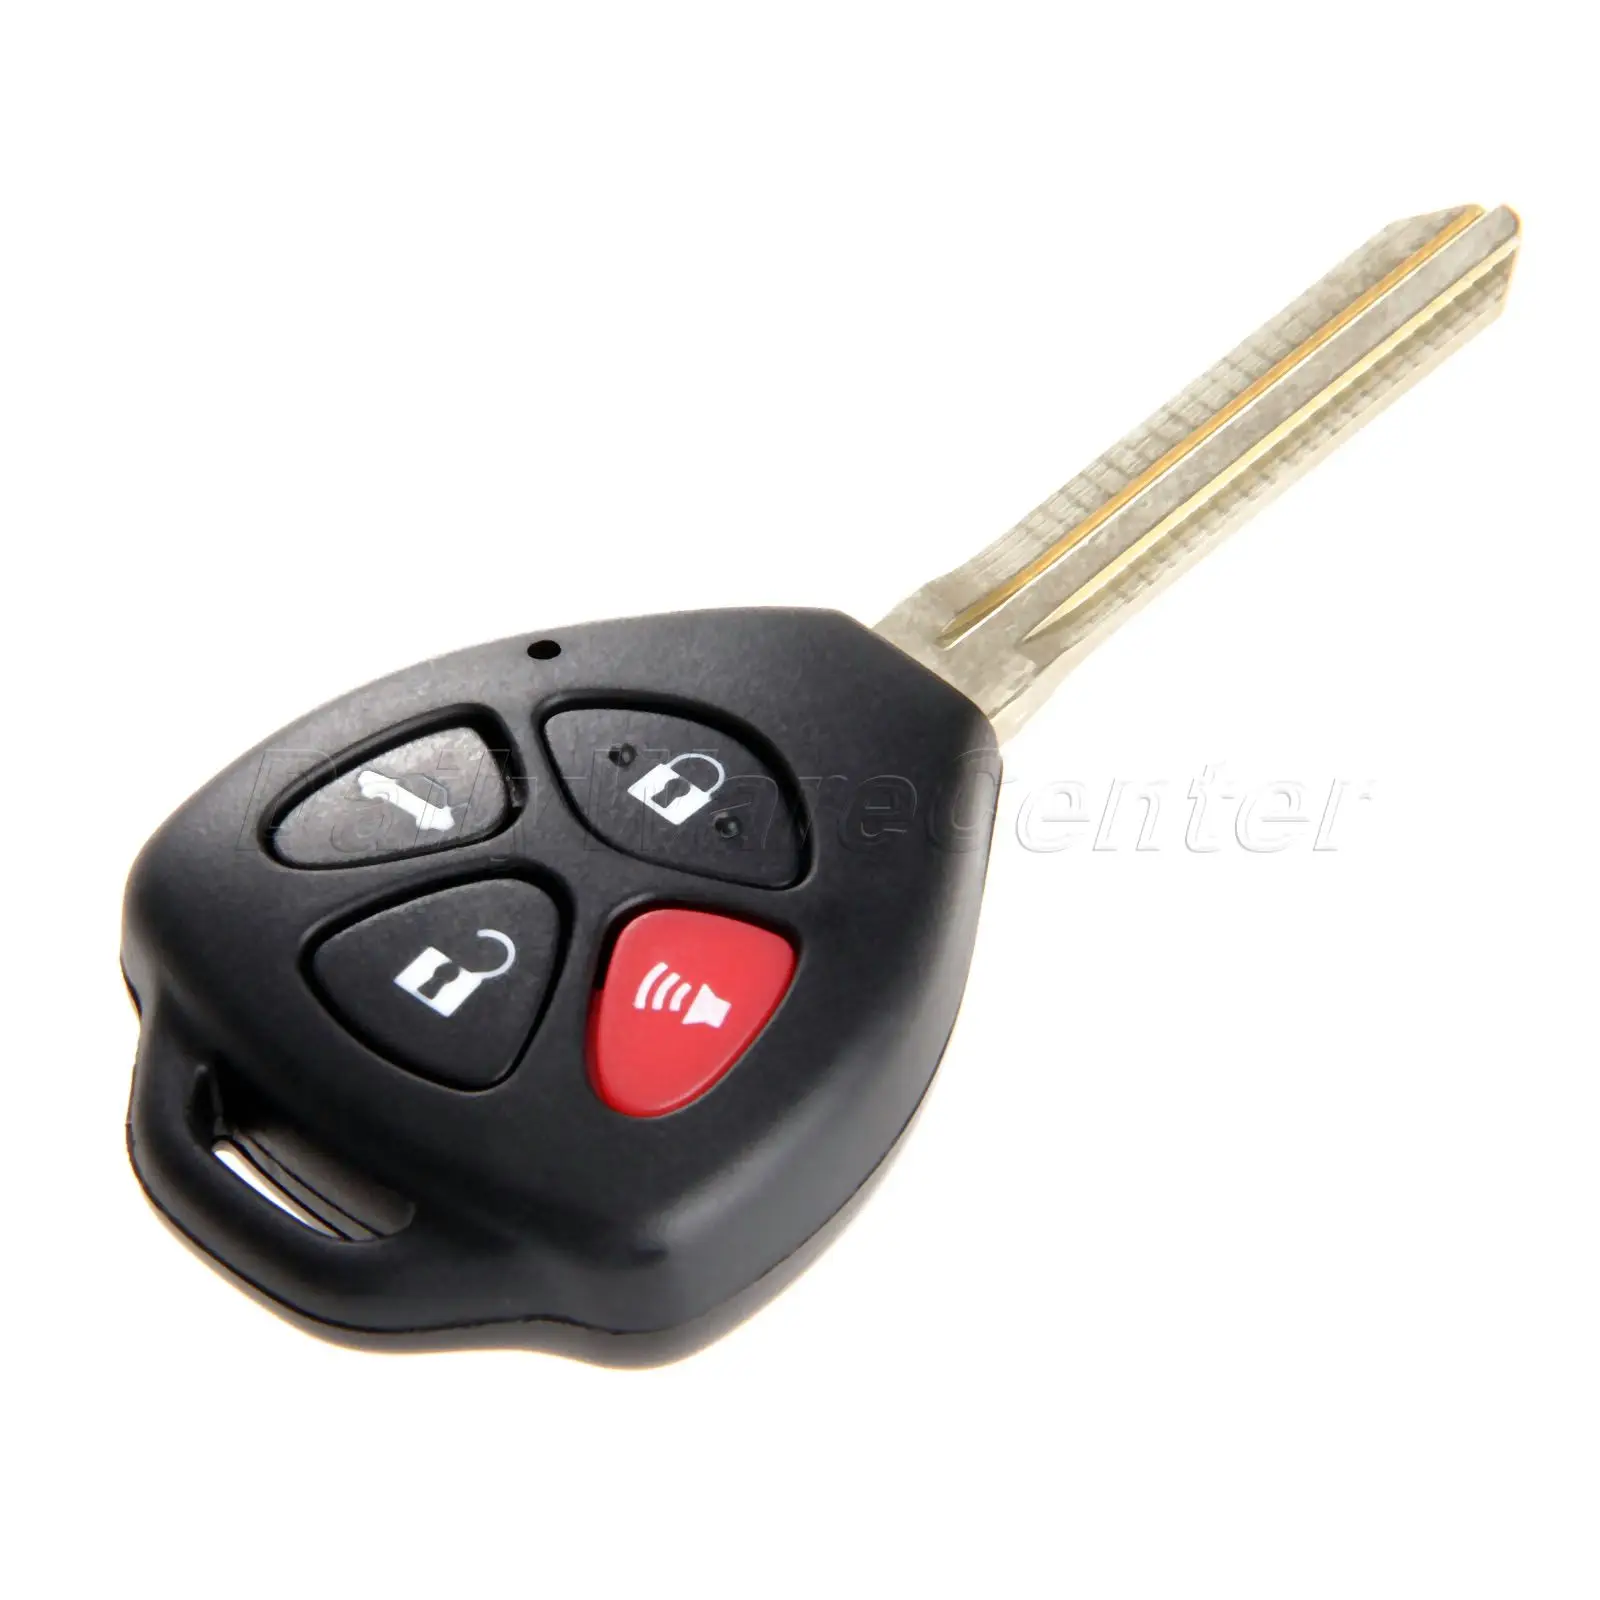 

Mgoodoo 3+1 4 Buttons Remote Key Shell Case Replacement Fob For Toyota Camry Corolla Avalon RAV4 Yaris Venza Matrix Uncut Blade